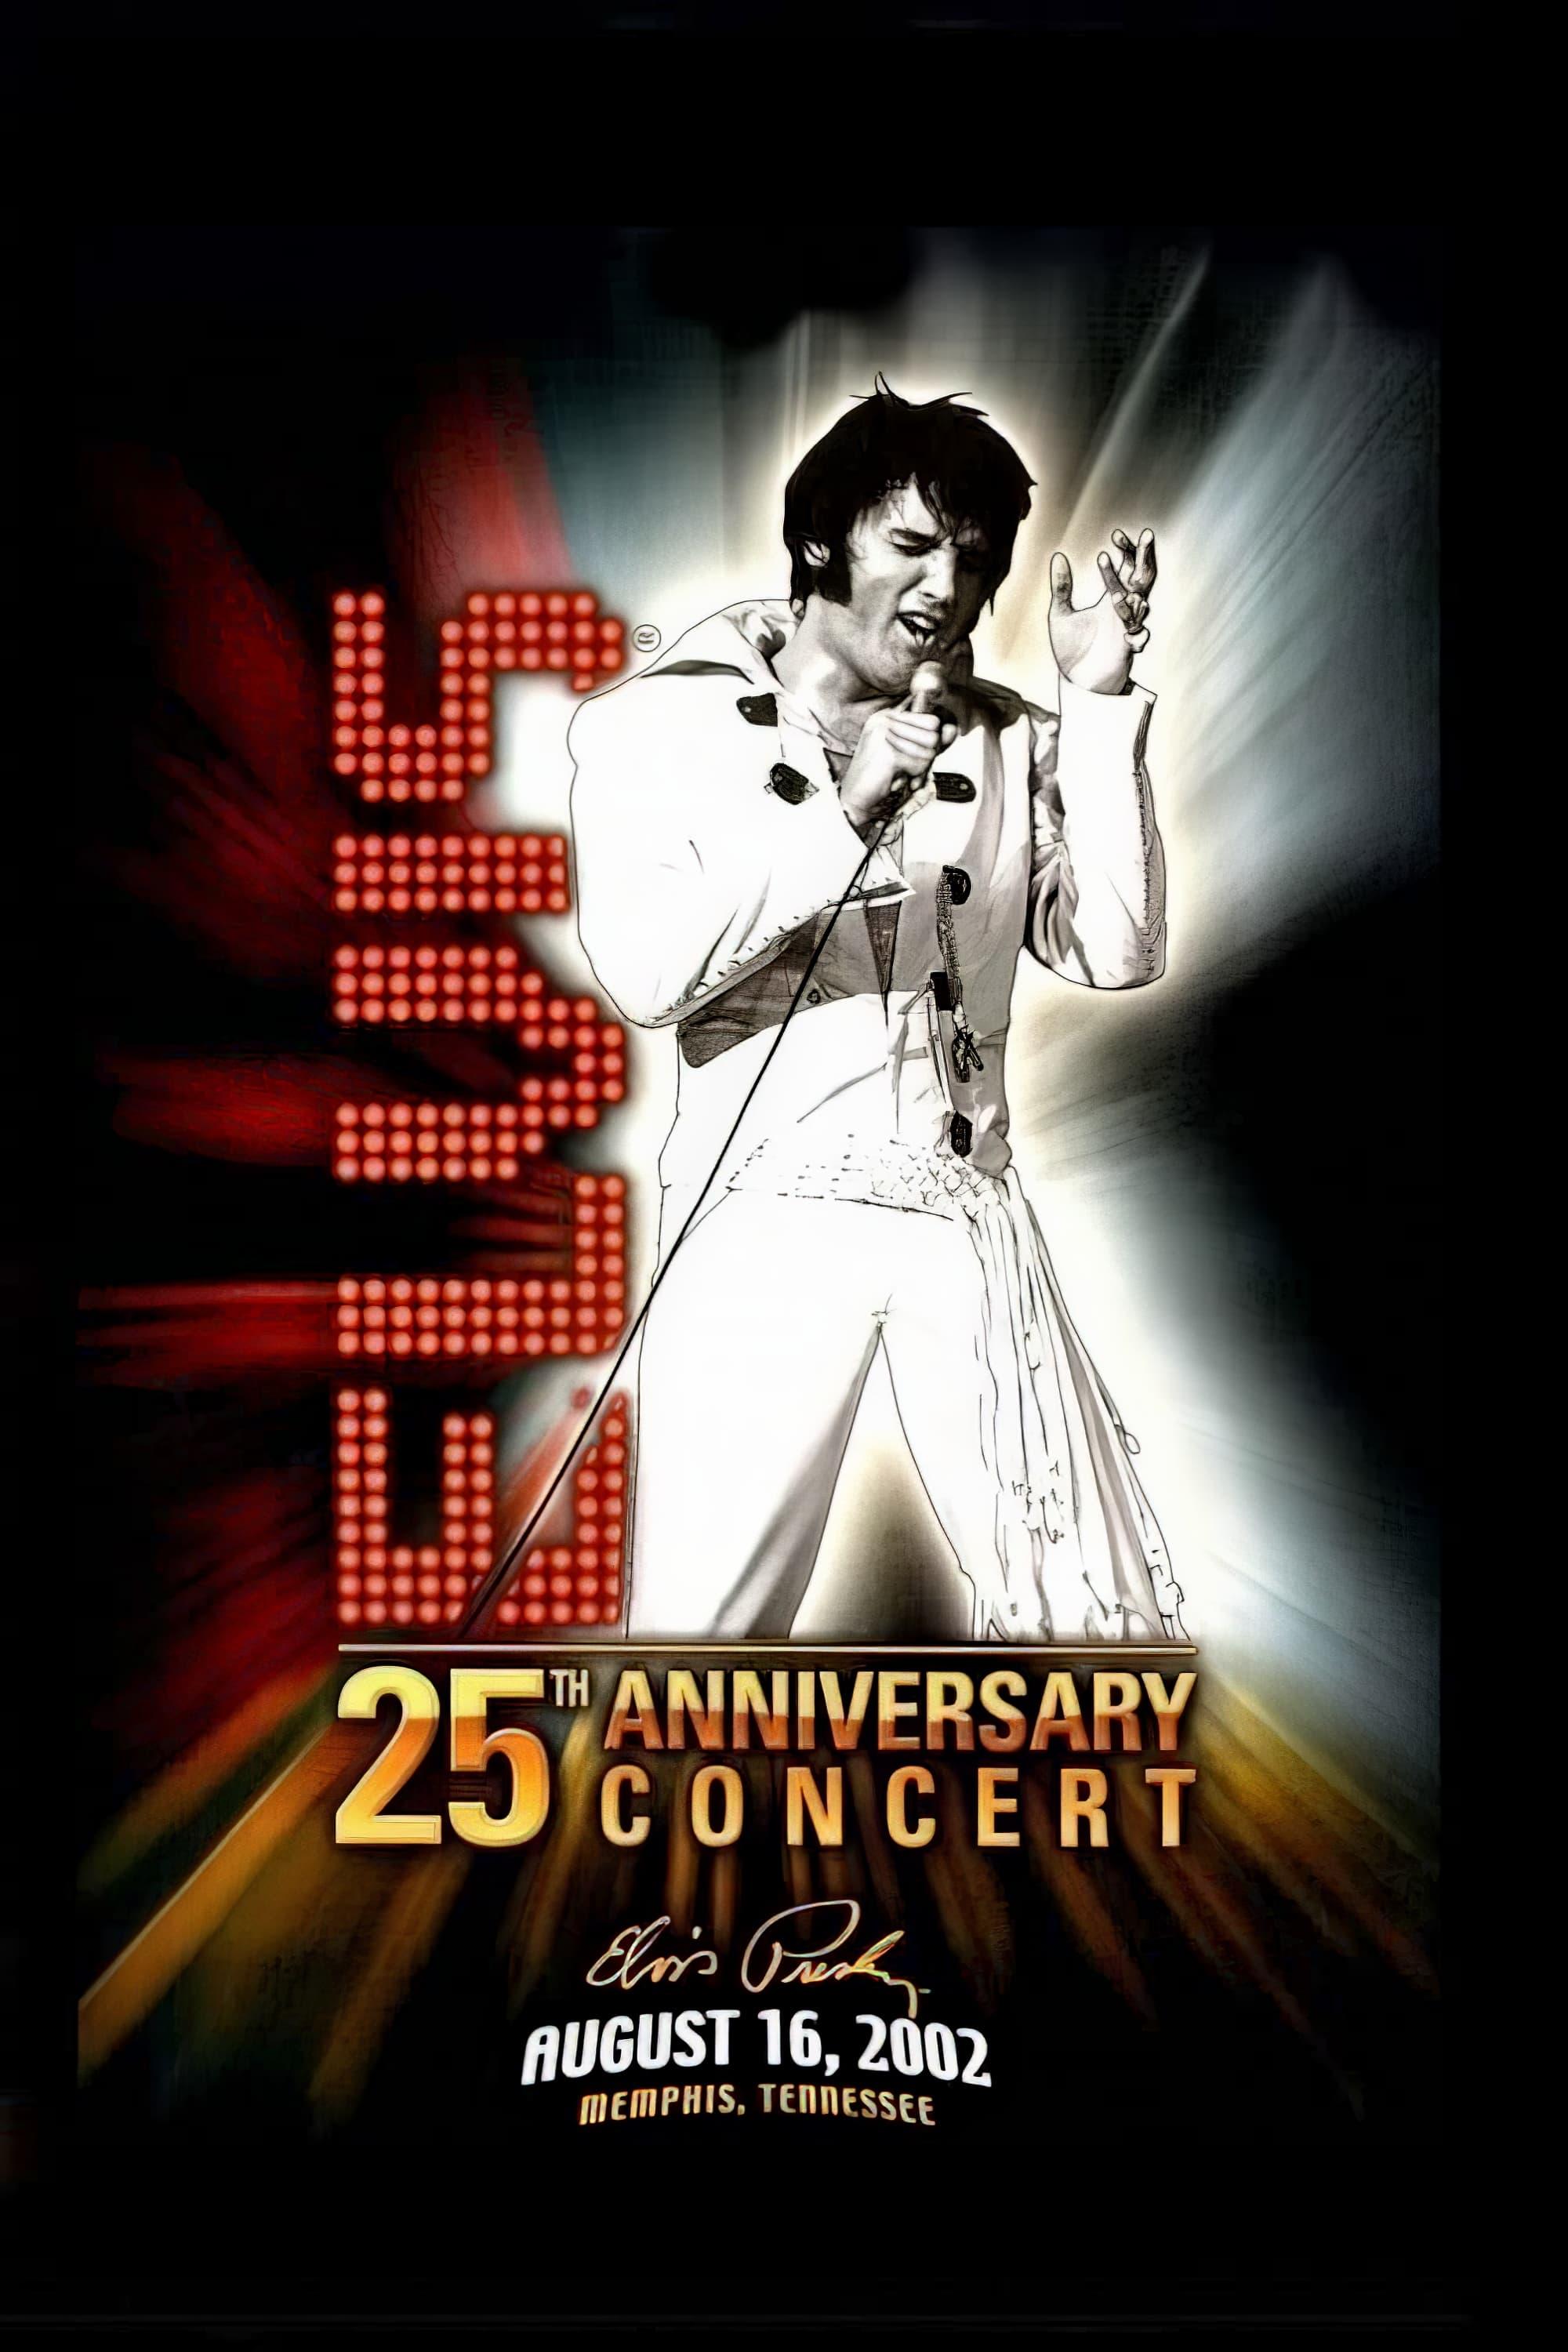 Elvis Lives: The 25th Anniversary Concert poster